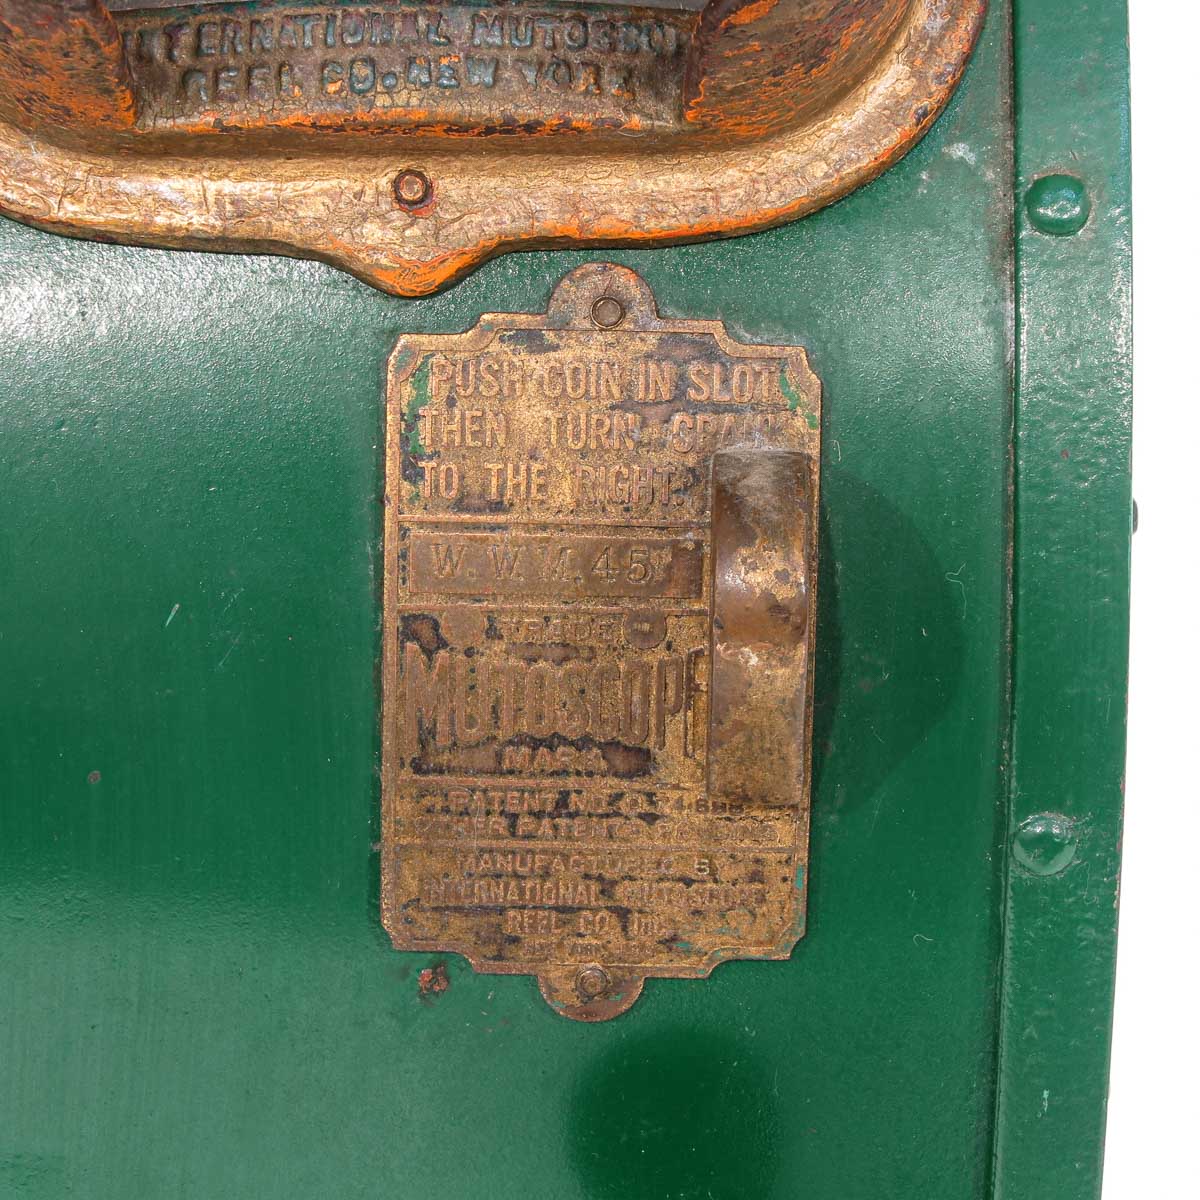 A Whispering Smith Rides Mutoscope - Image 8 of 10